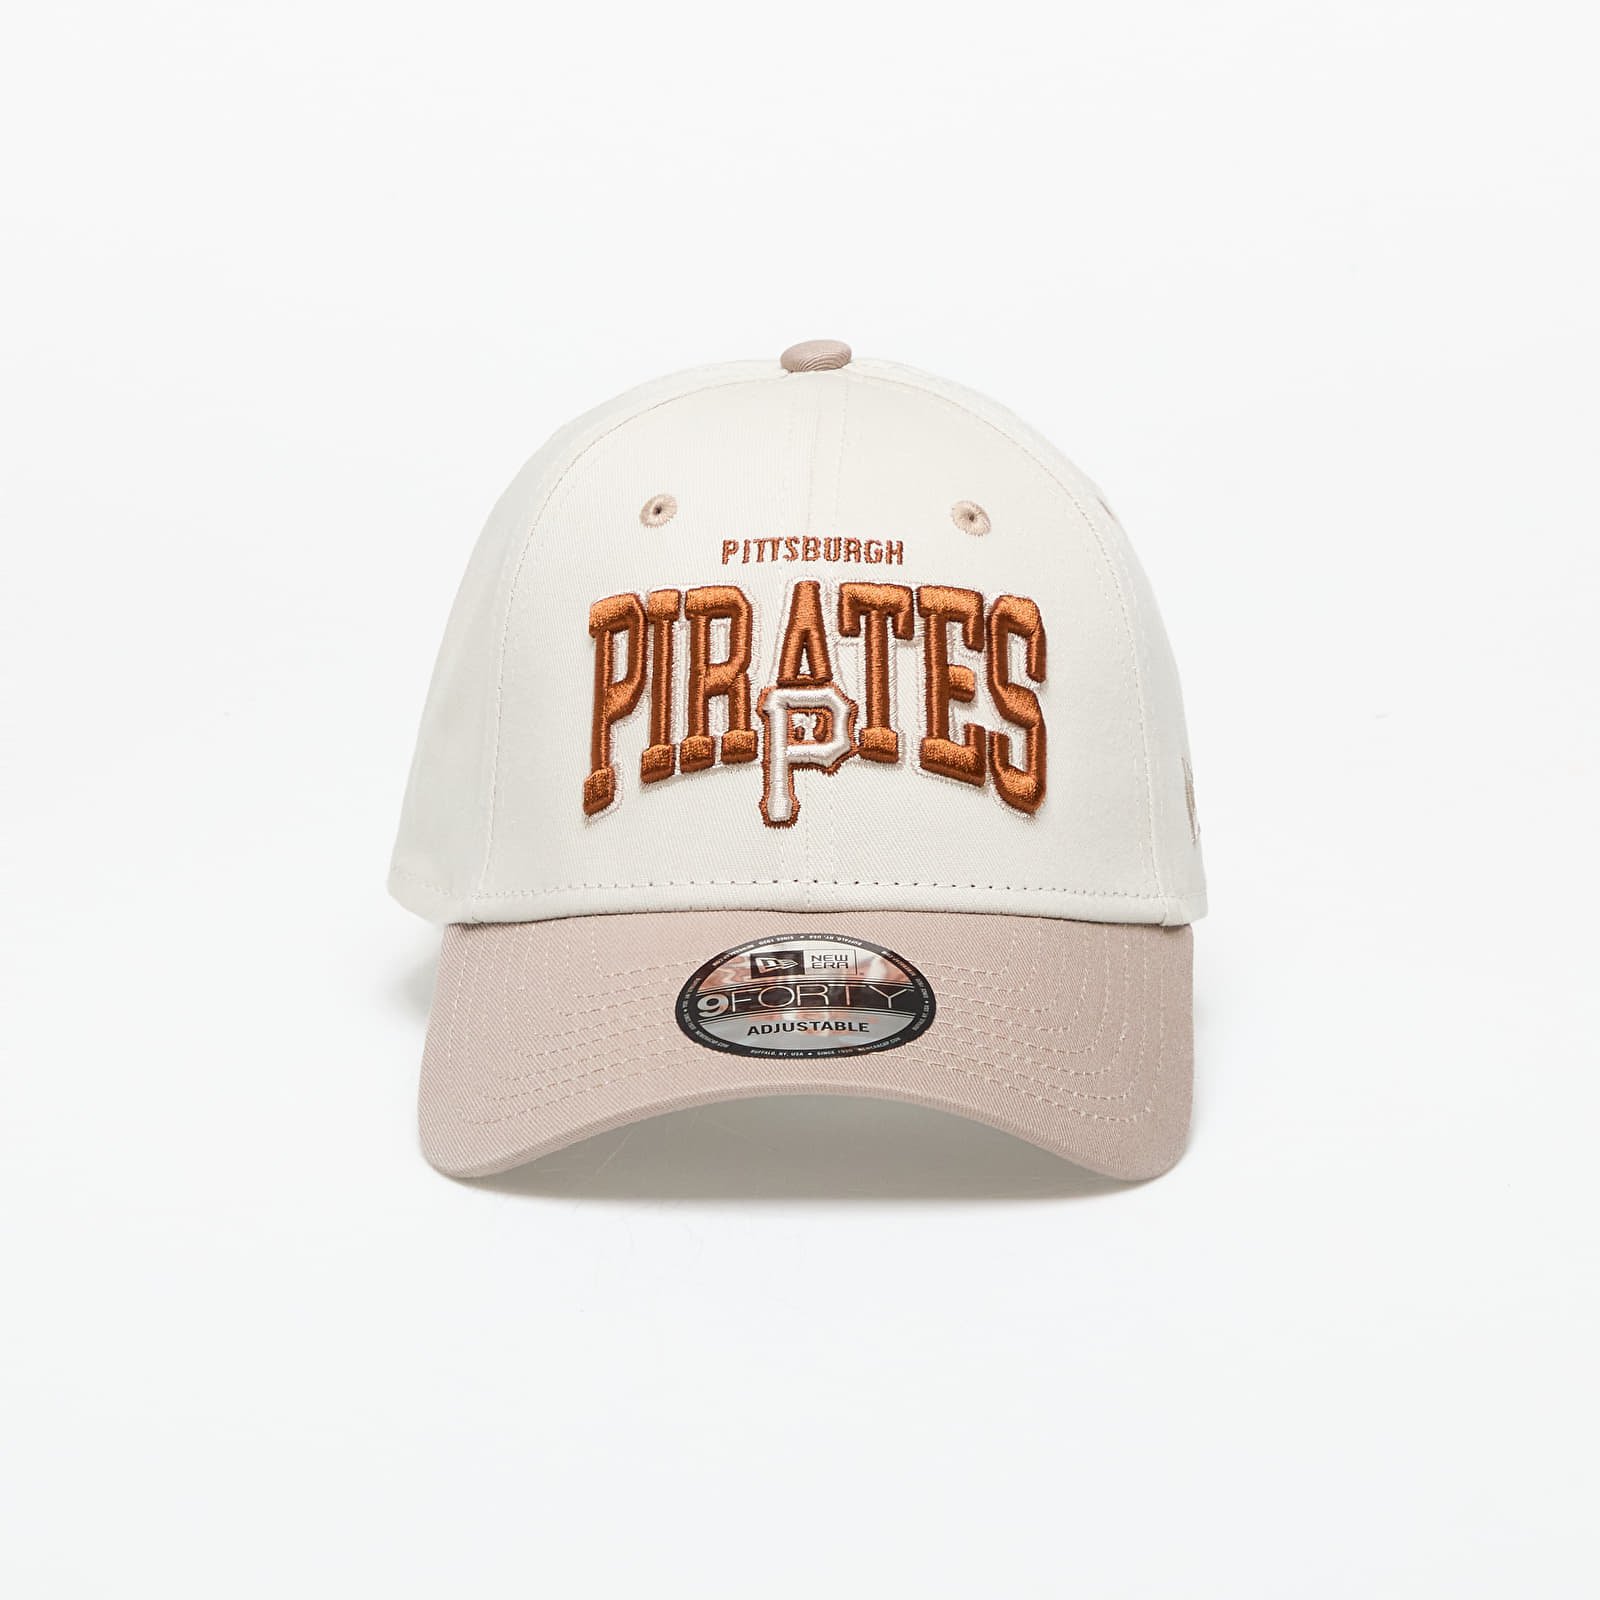 Pittsburgh Pirates MLB White Crown 9FORTY Adjustable Cap